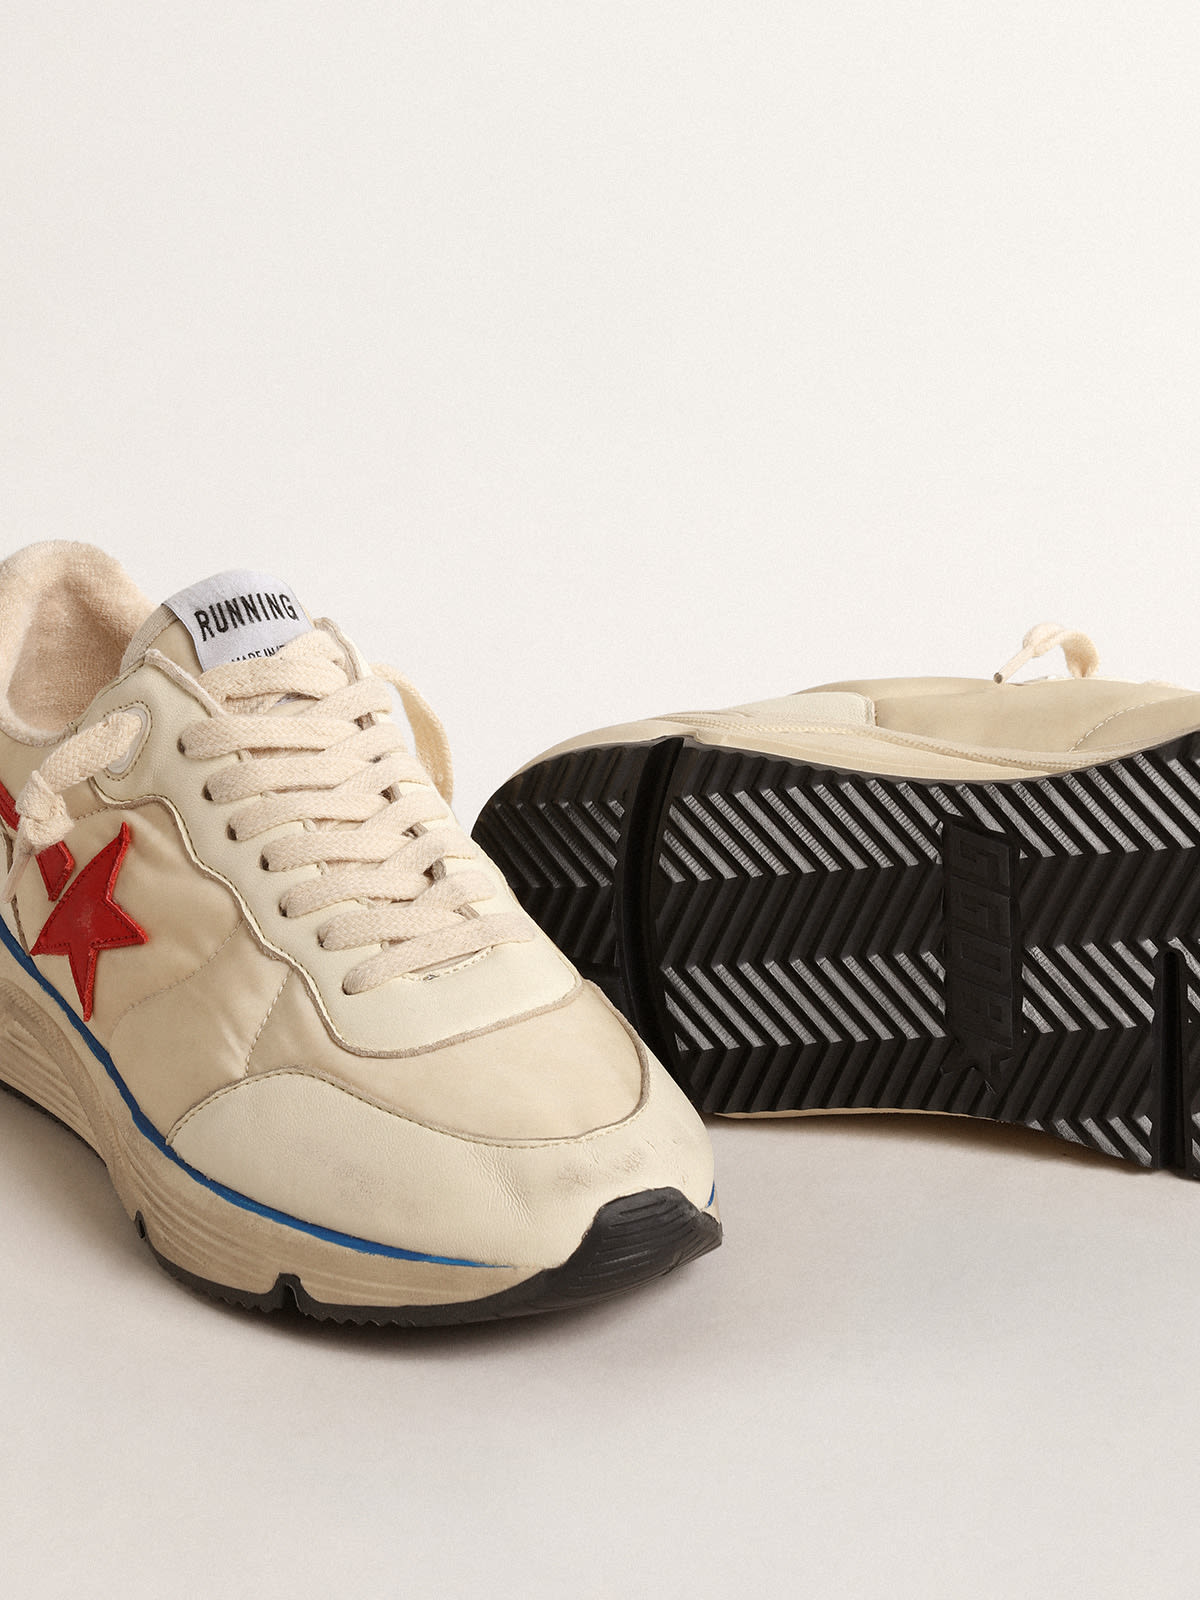 Golden Goose - Women’s Running Sole LTD in beige nylon with red leather star in 